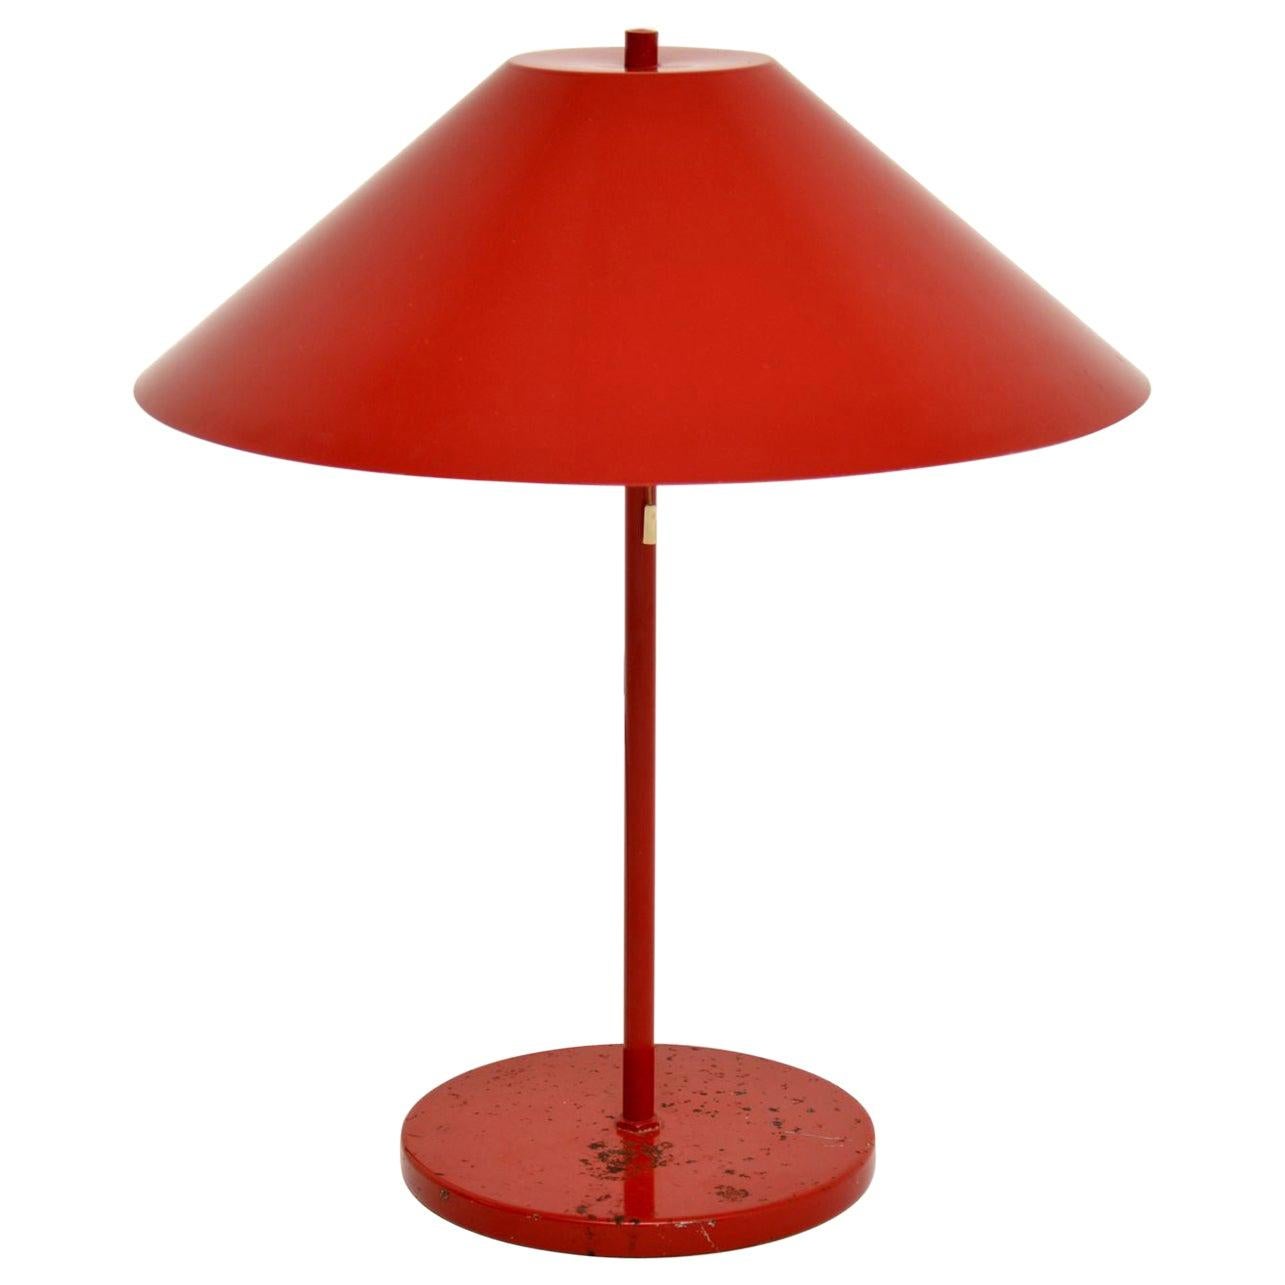 1960s Danish Vintage Table Lamp by Es Horn